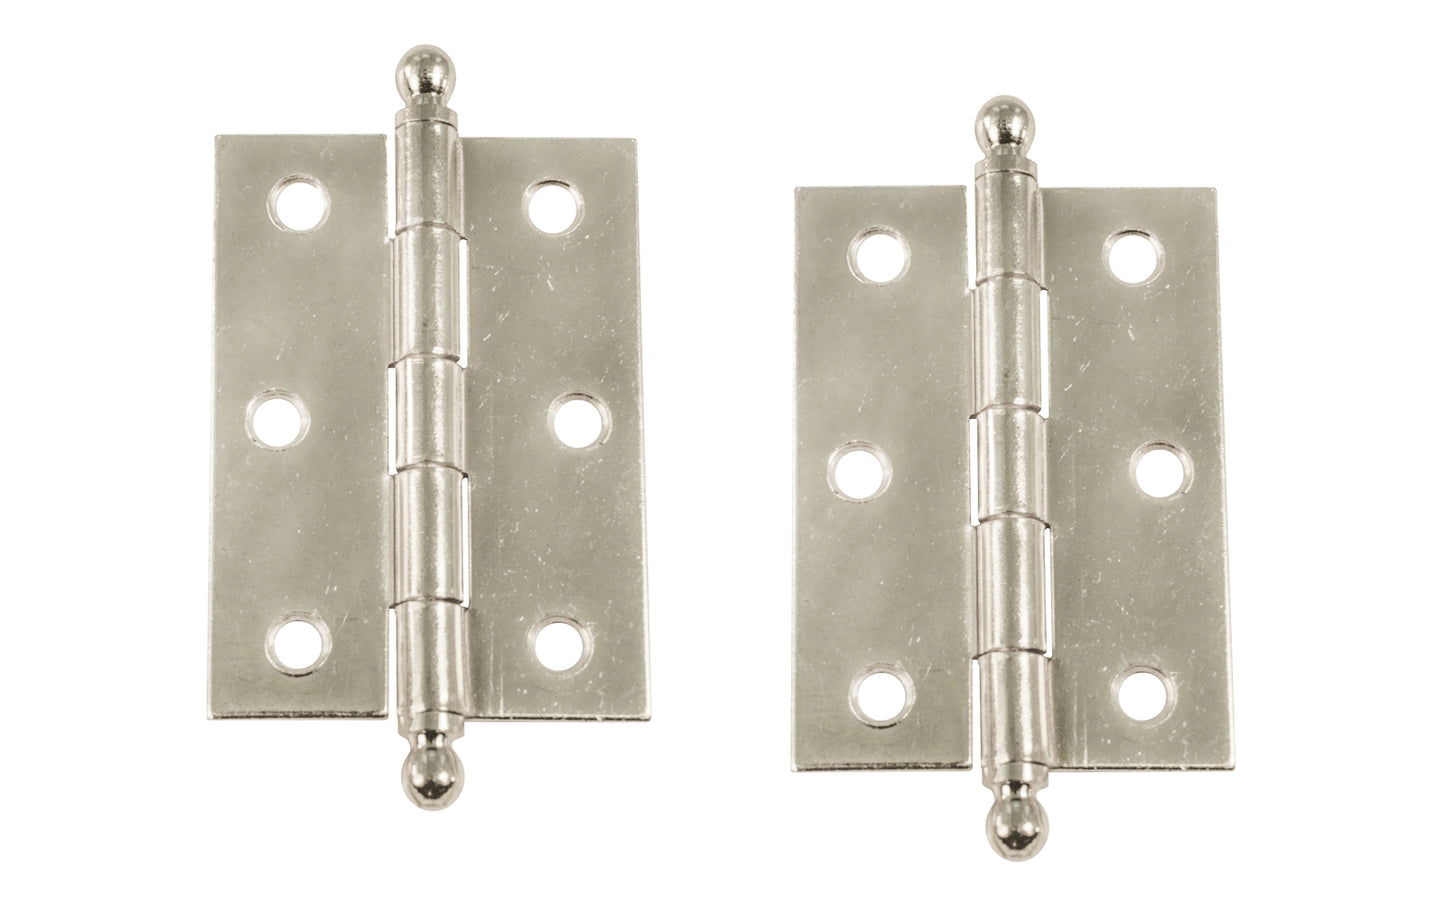 Traditional & classic ball-tip steel cabinet hinges with loose pins. Removable hinge pins which makes for easy installation when working with cabinets. 2-7/16" high x 1-3/4" wide. Sold as a pair. Polished Nickel Finish.